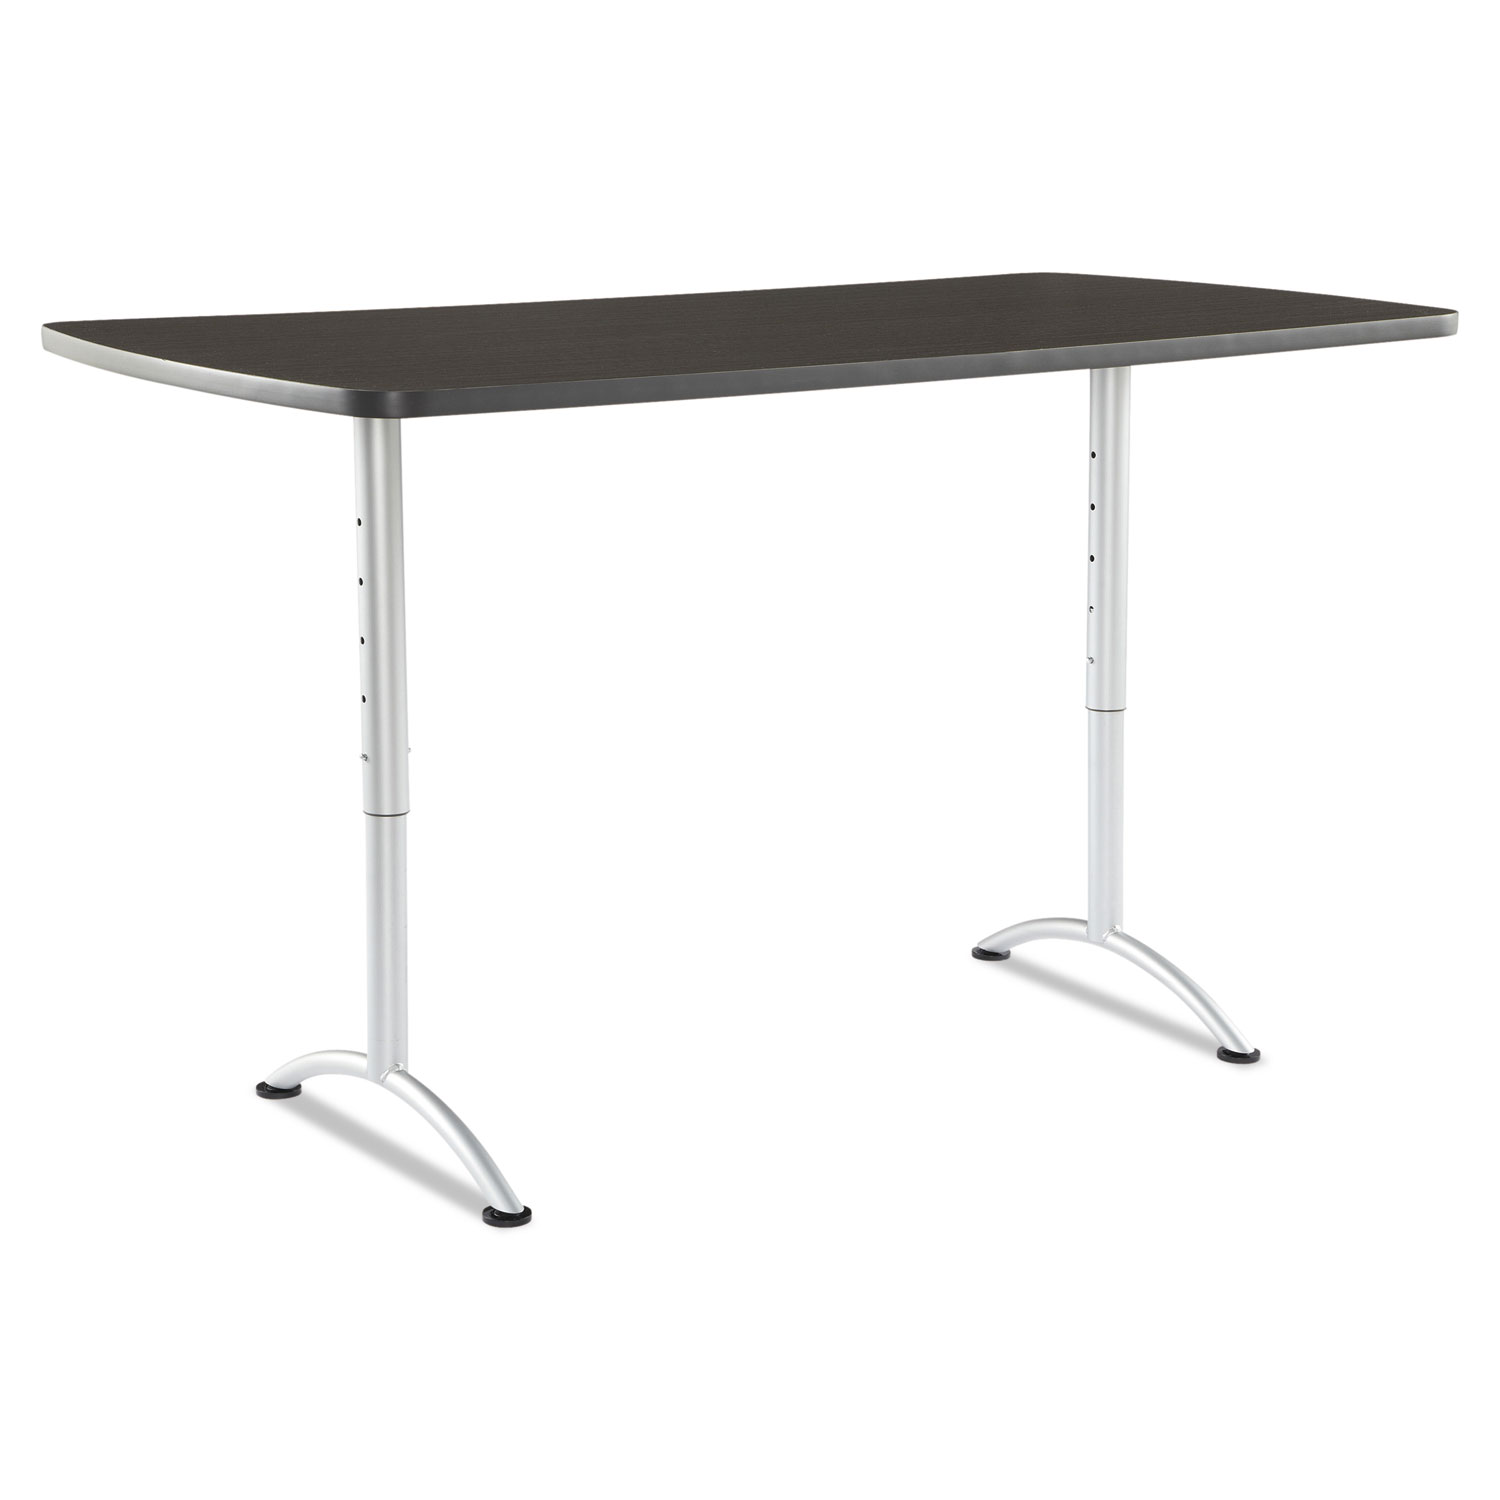  Iceberg 69325 ARC Sit-to-Stand Tables, Rectangular Top, 36w x 72d x 30-42h, Gray Walnut/Silver (ICE69325) 